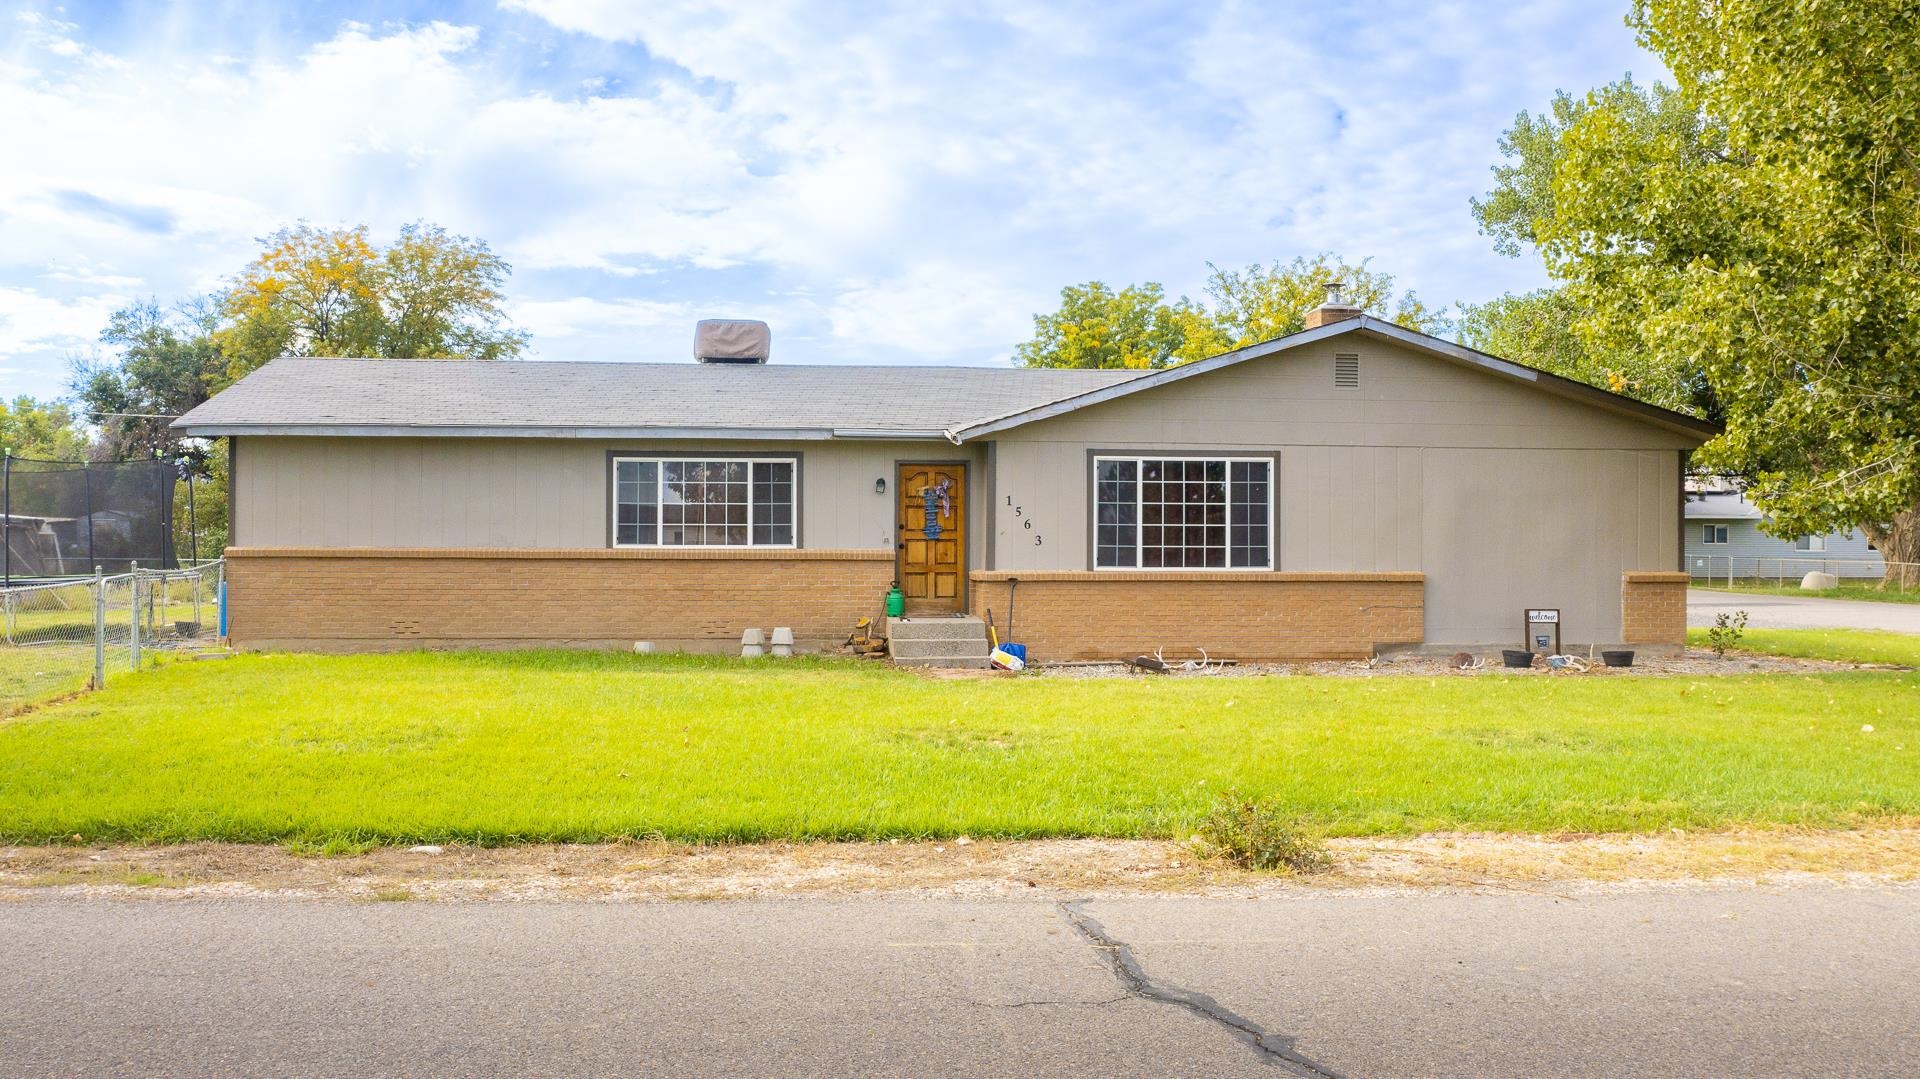 Awesome opportunity to own a home on almost 3/4 of an acre in Fruita for under $375,000! Don't miss out on this rare opportunity for this 3 bed 2 bath home on .62 acre lot with irrigation water. This home is full of potential and ready for the next owner to put their love into it. Bring your animals, no HOA, and a huge Fenced yard surrounded by large trees perfect for dogs and kiddos to get their energy out. Inside the kitchen is equipped with newer appliances and new carpet in the bedroom. The living room has an aura brought on by the wood burning fireplace perfect for cozy evenings in the winter. With nearly 1700 sq. ft. of living space, this home has the makings to be an incredible home for the next owners to make it theirs.